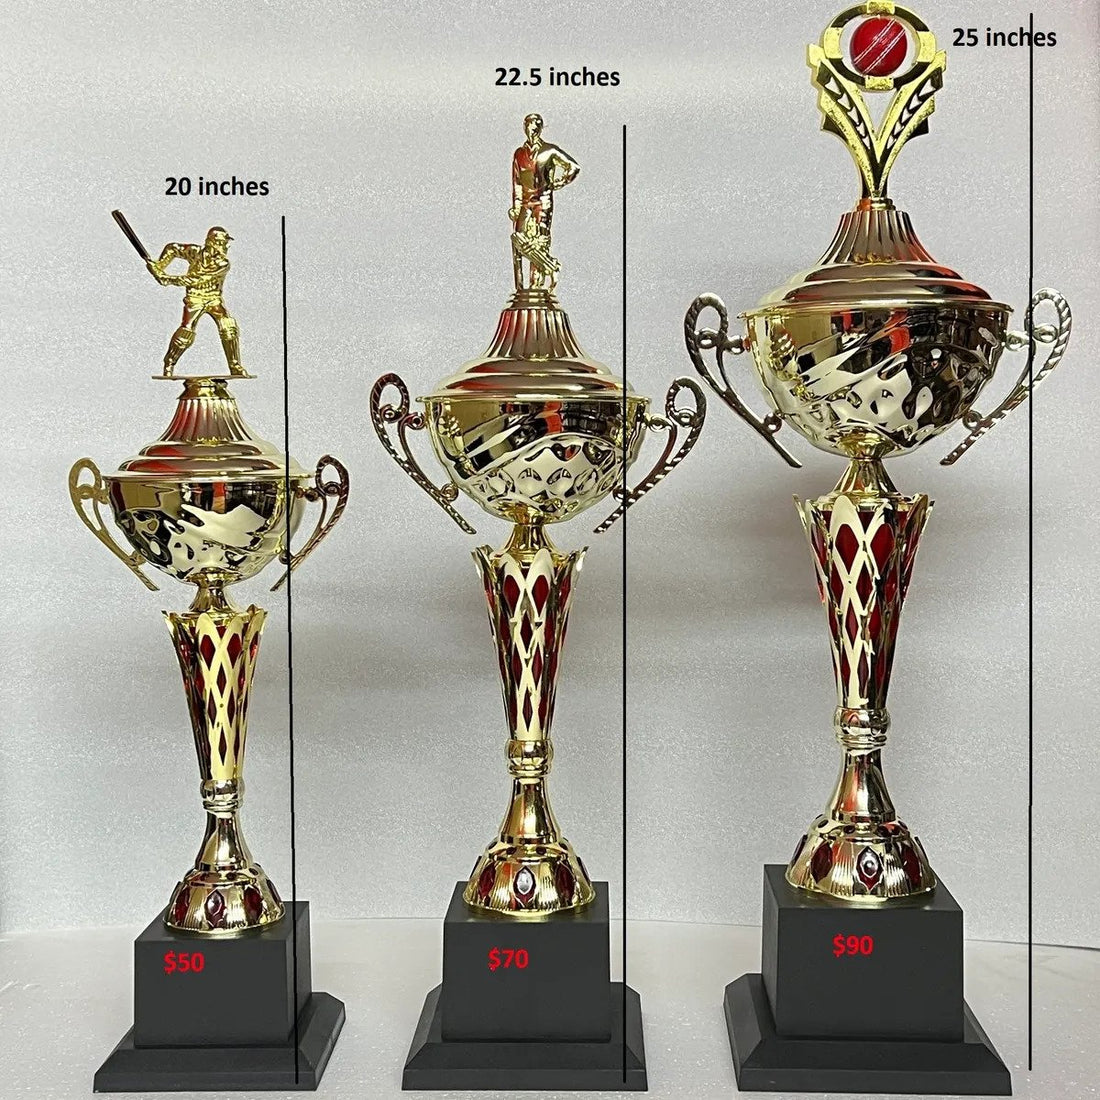 Score Big with Custom Cricket Trophies: Order for Your Team!